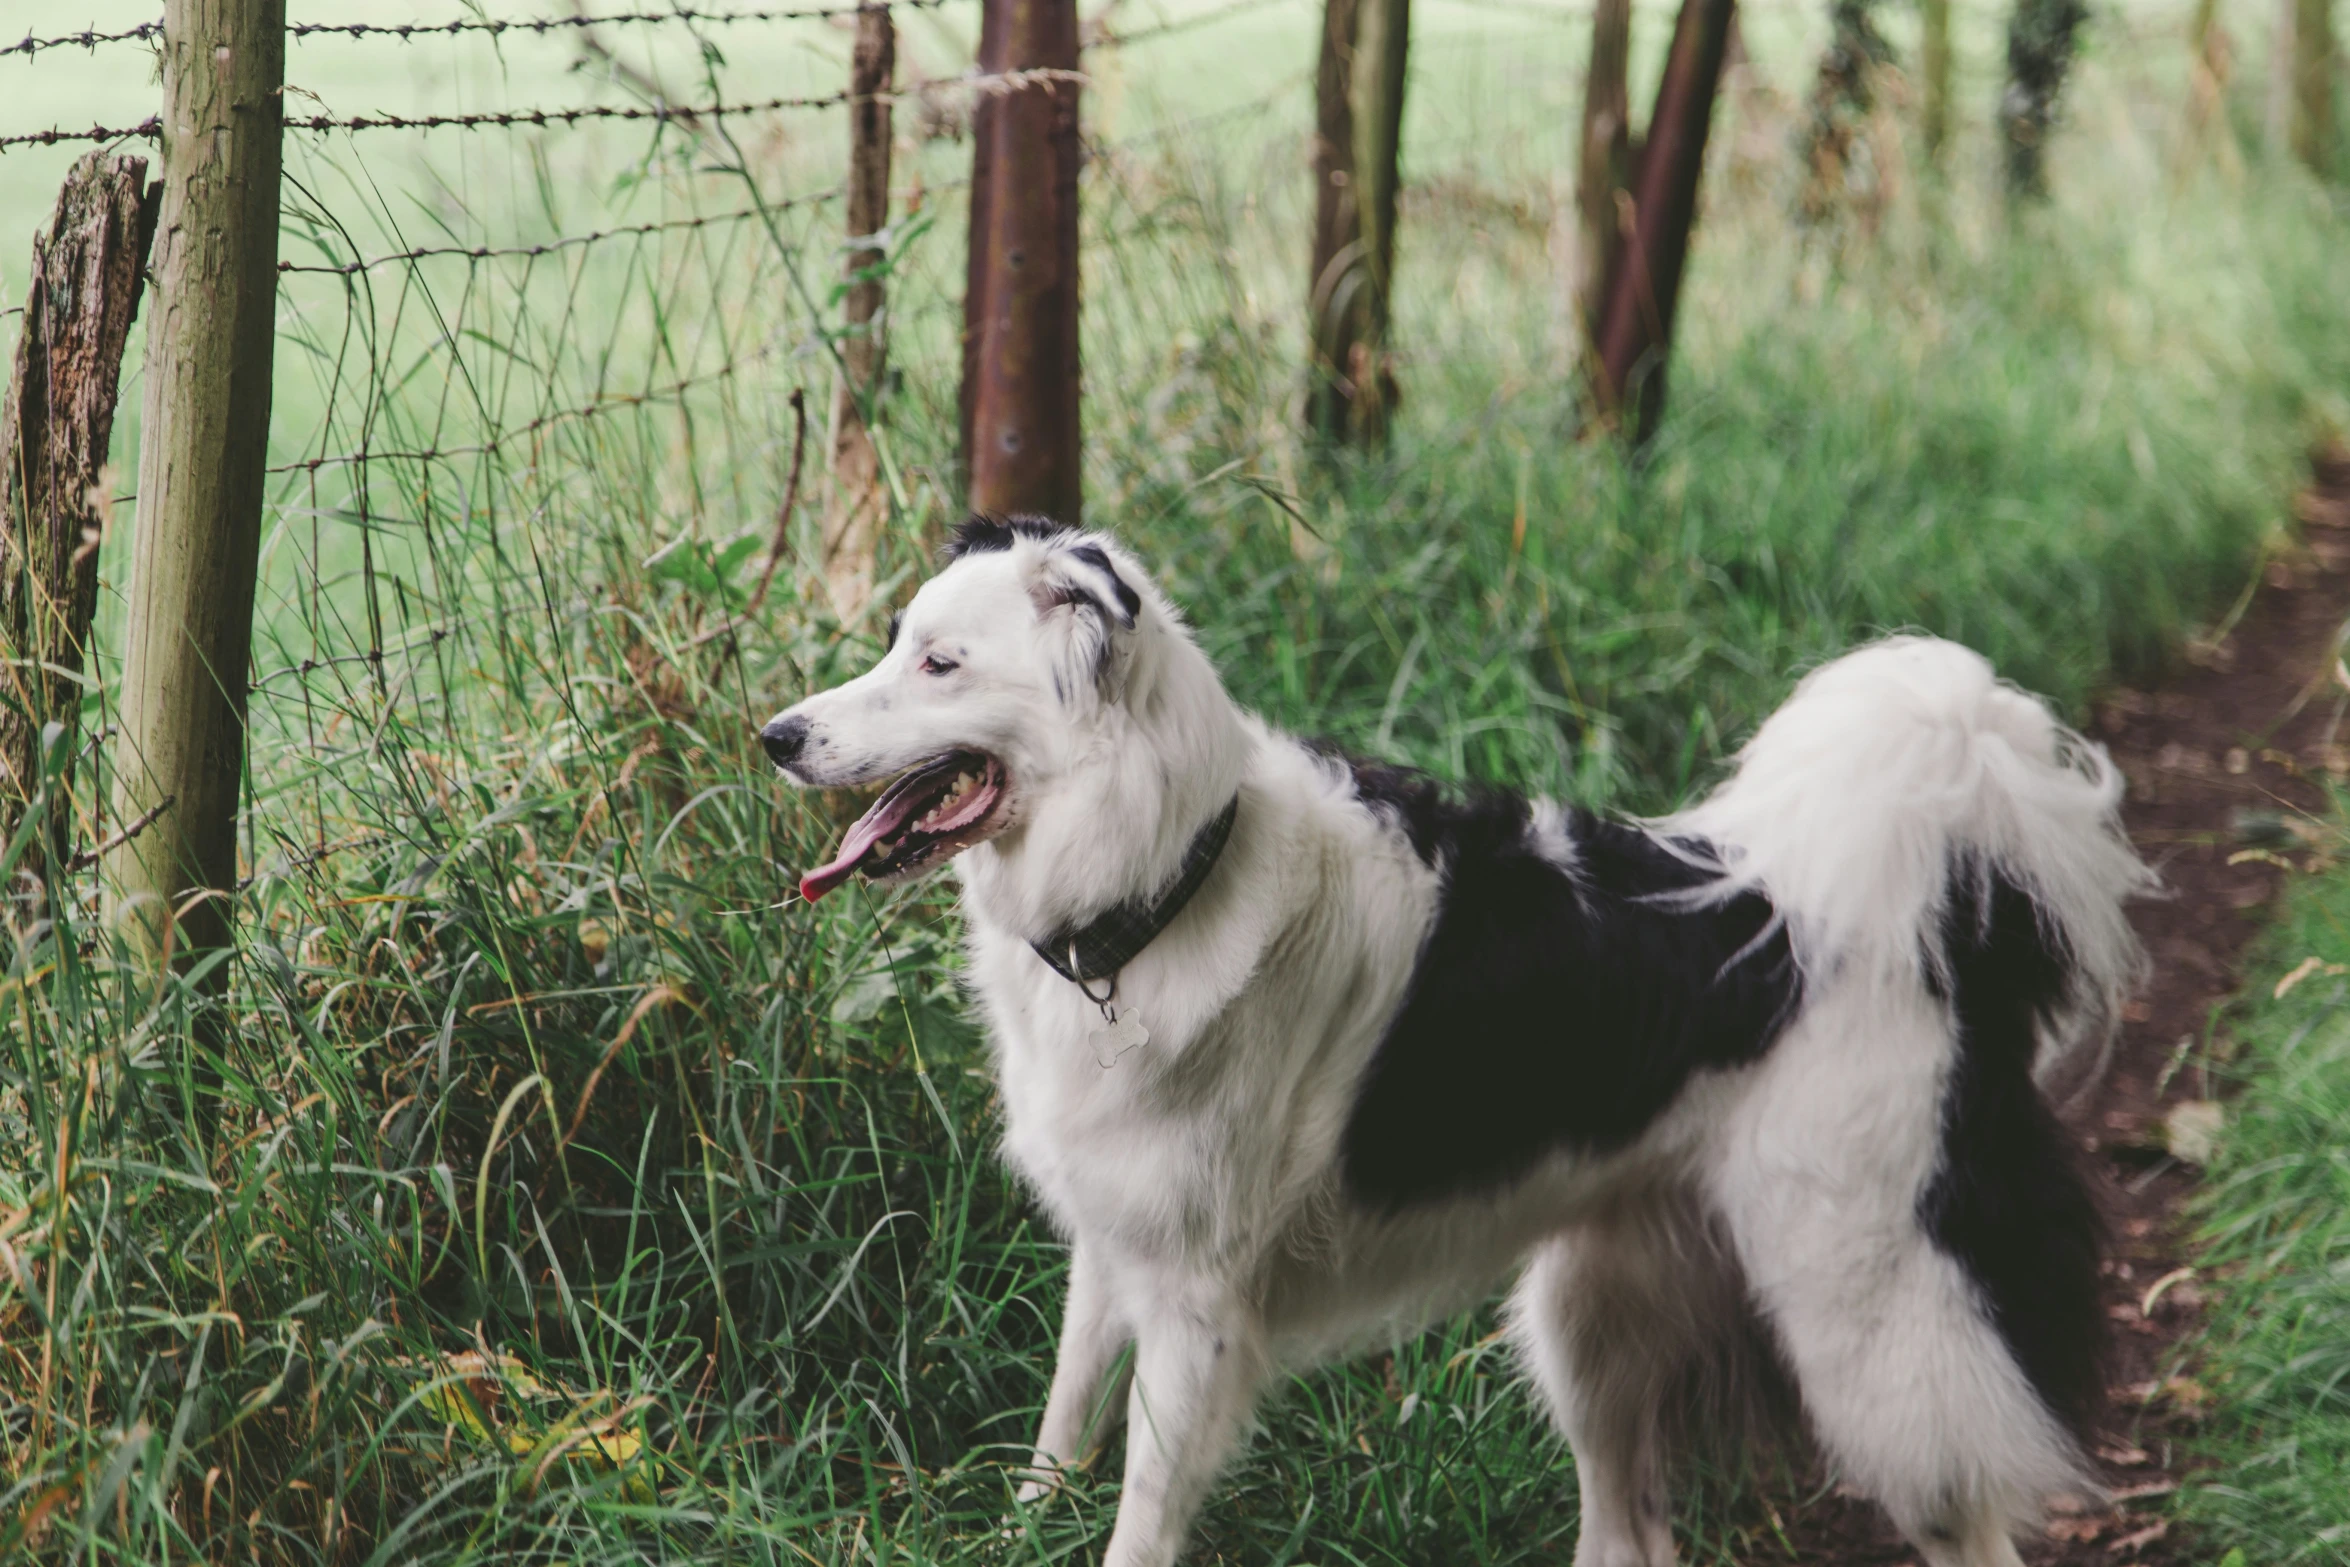 a white and black dog is standing in grass